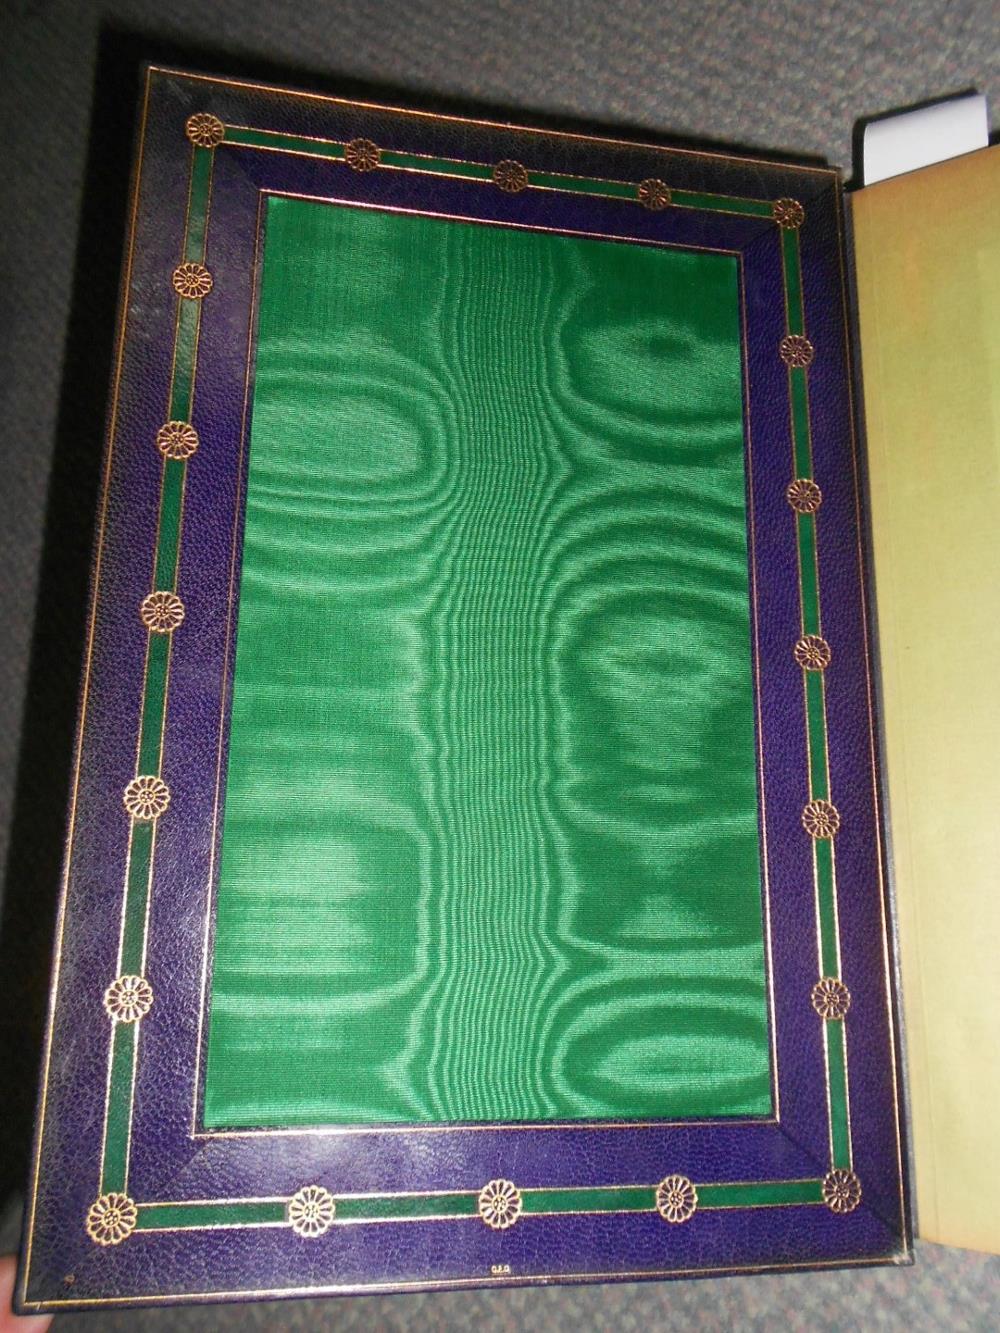 Fine Binding. ROSTAND (Edmond) Cyrano de Bergerac, Paris 1899, large 8vo, illustrated, bound with an - Image 3 of 8